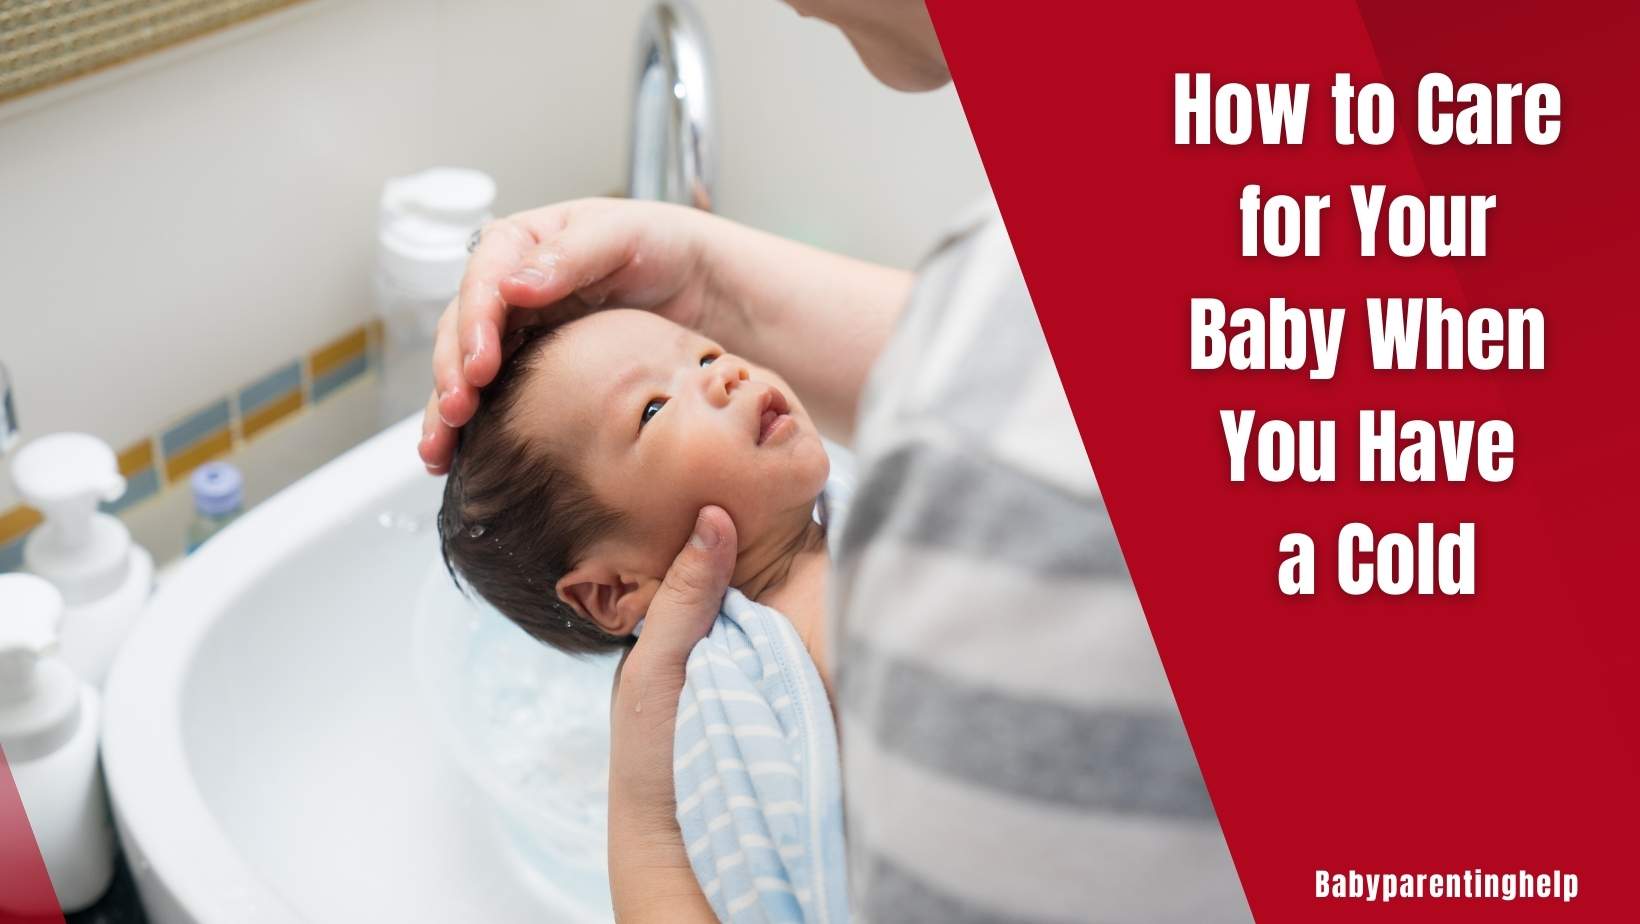 How to Care for Your Baby When You Have a Cold